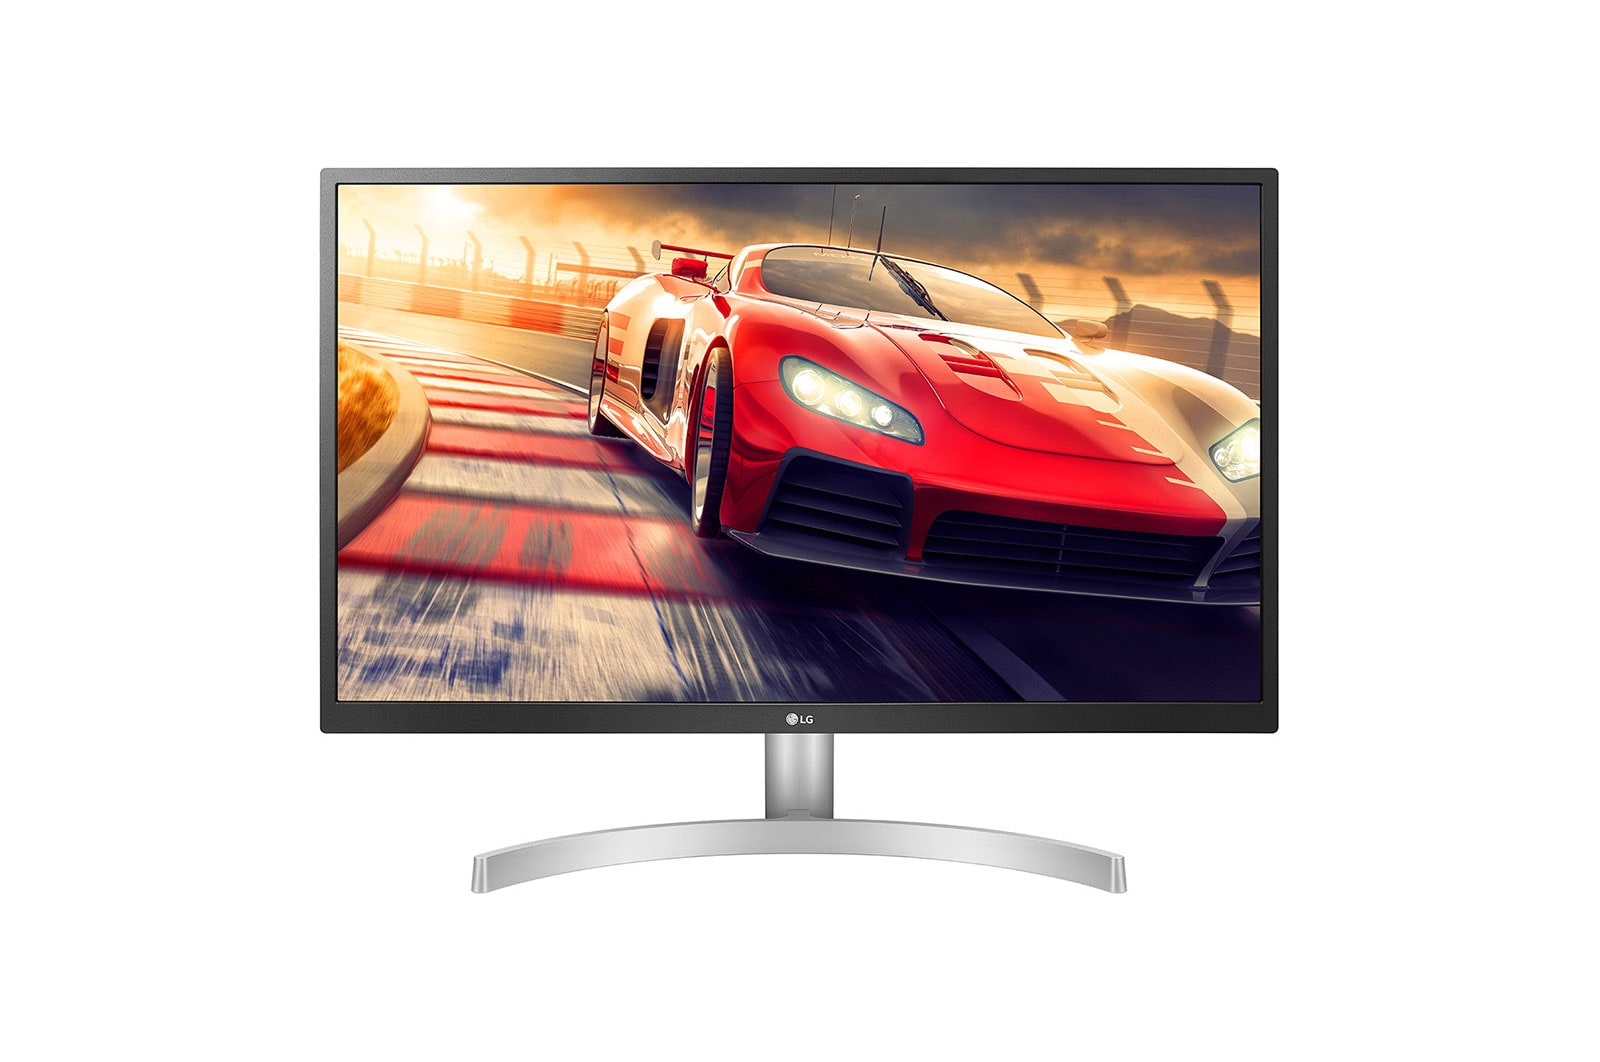 LG 27 (68.58cm) 4K Ultra HD IPS Panel White Colour Monitor (27UL500)  (Response Time: 5 ms, 60 Hz Refresh Rate)